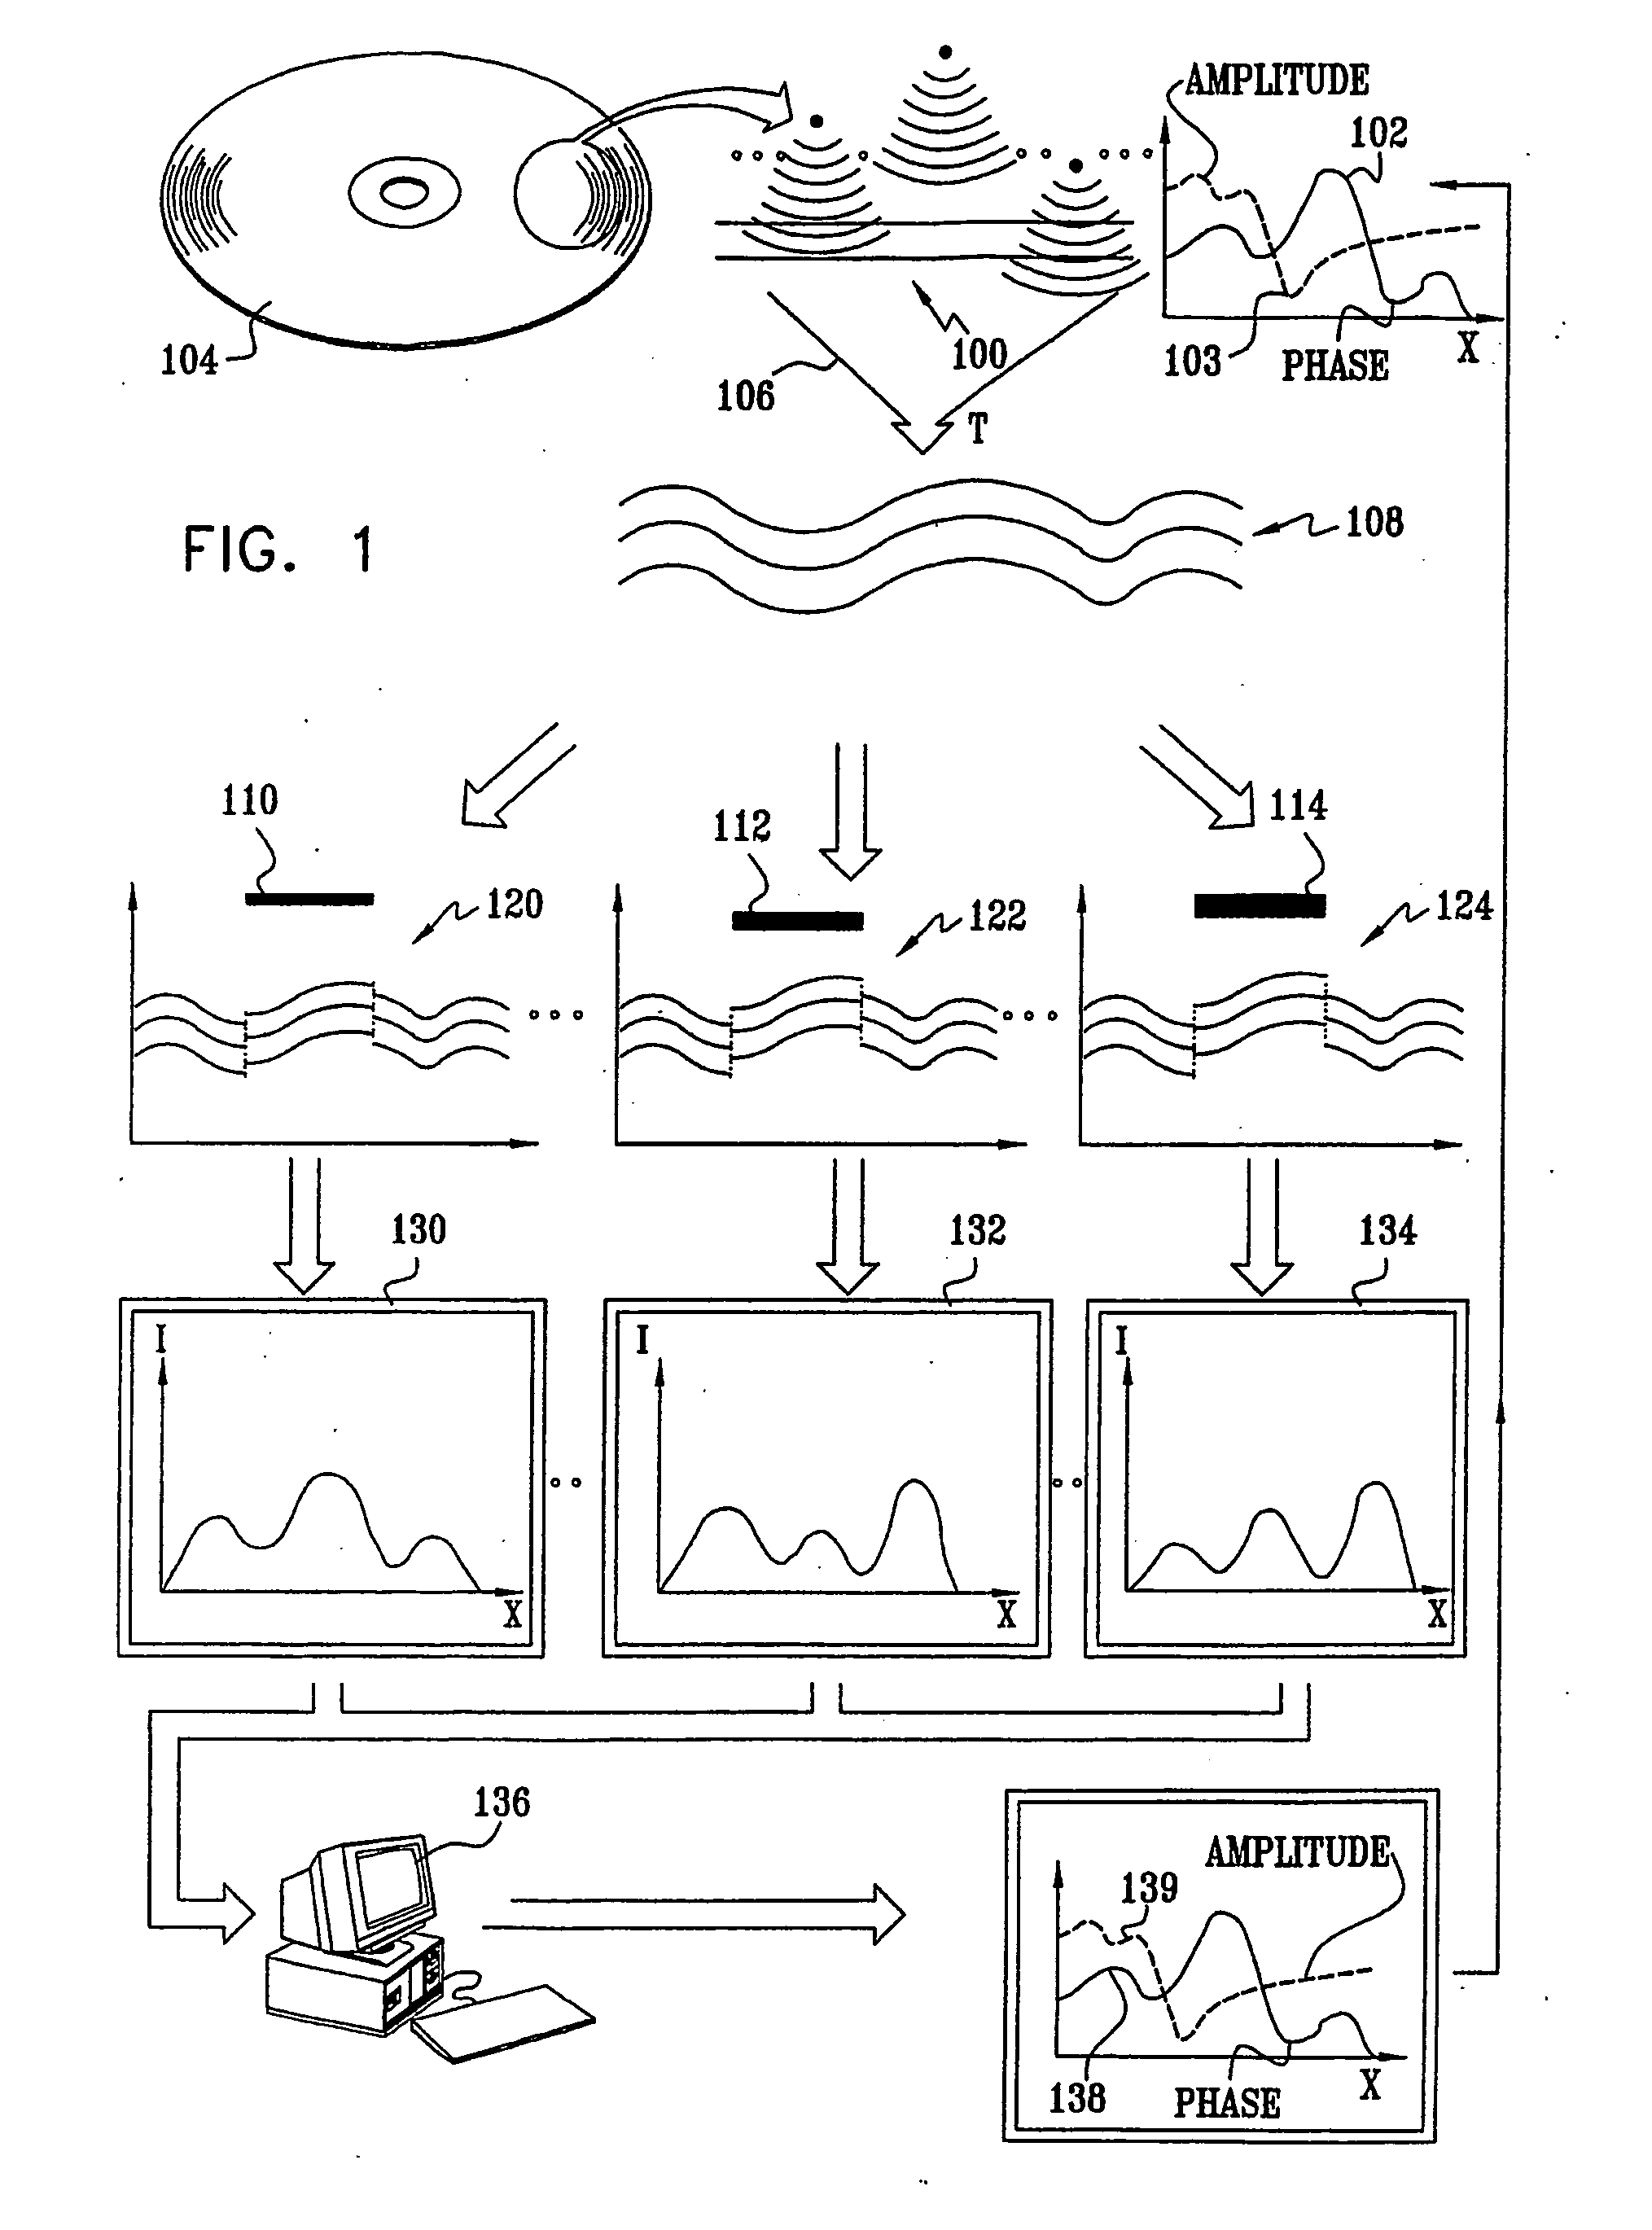 Methods and apparatus for wavefront manipulations and improved 3-D measurements